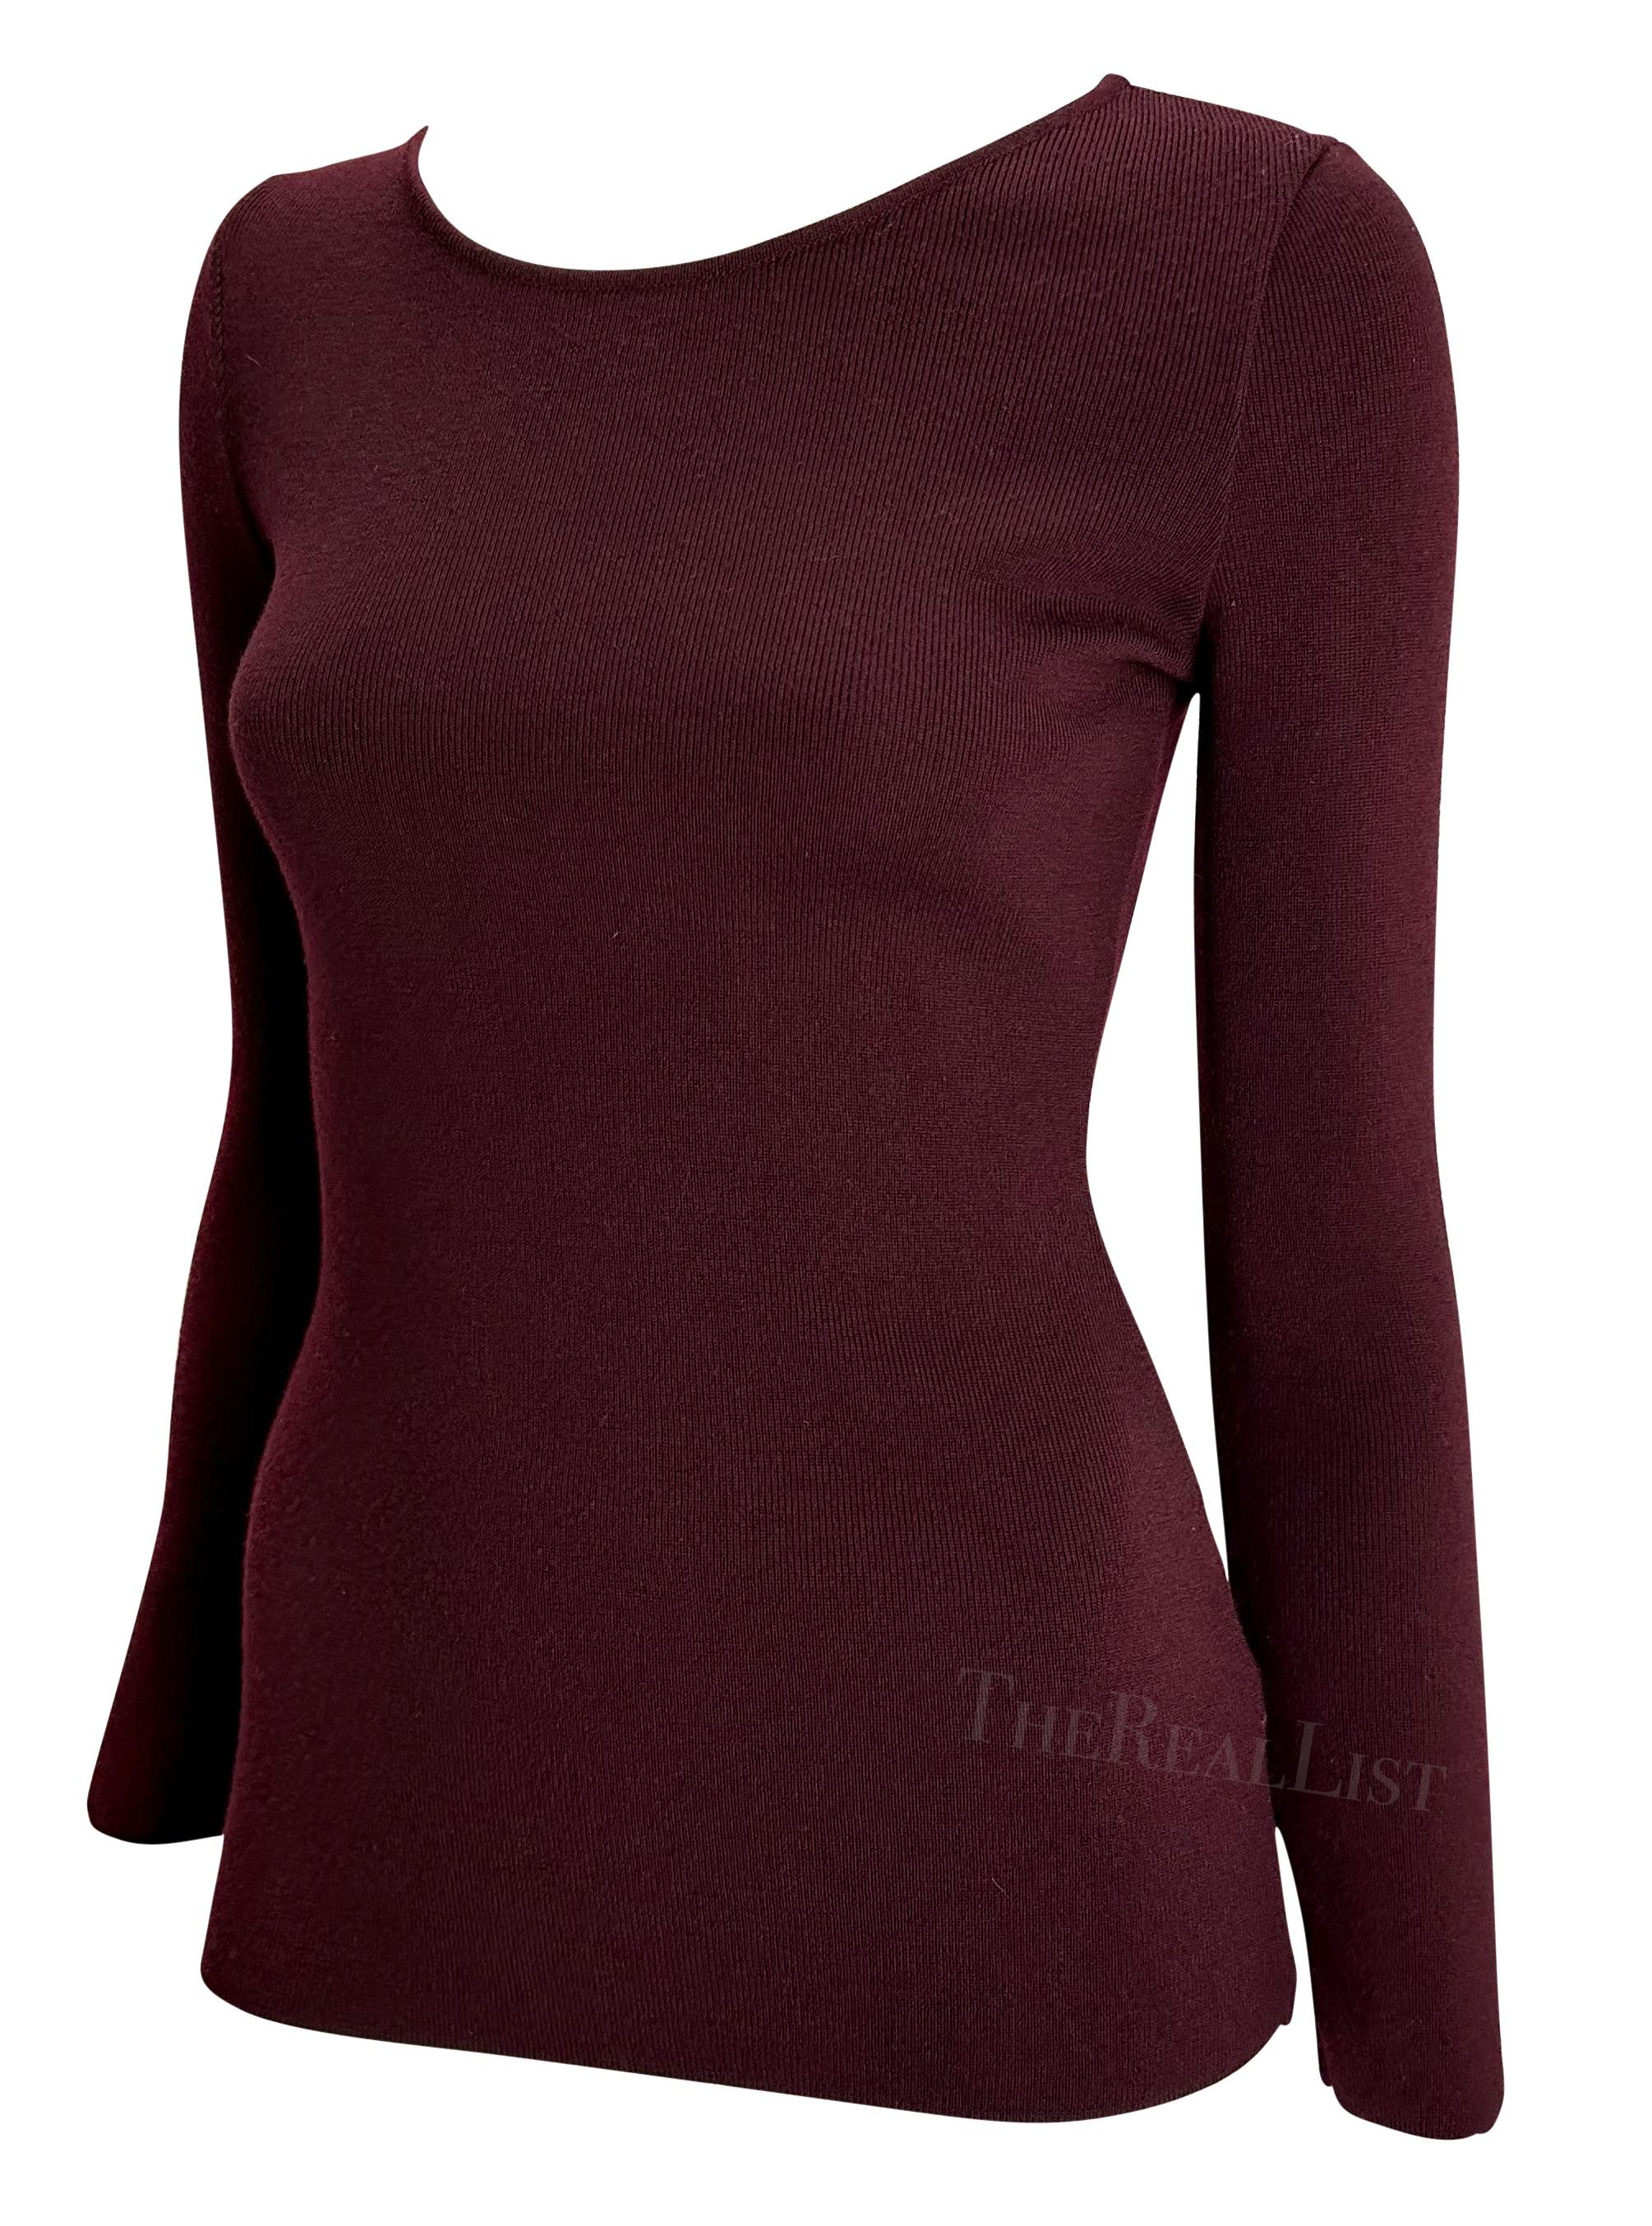 Presenting a beautiful burgundy knit Gucci sweater, designed by Tom Ford. From the Fall/Winter 1996 collection, this sweater features a wide crew neckline and is the perfect Gucci by Tom Ford staple.

Approximate measurements:
Size - Small
32